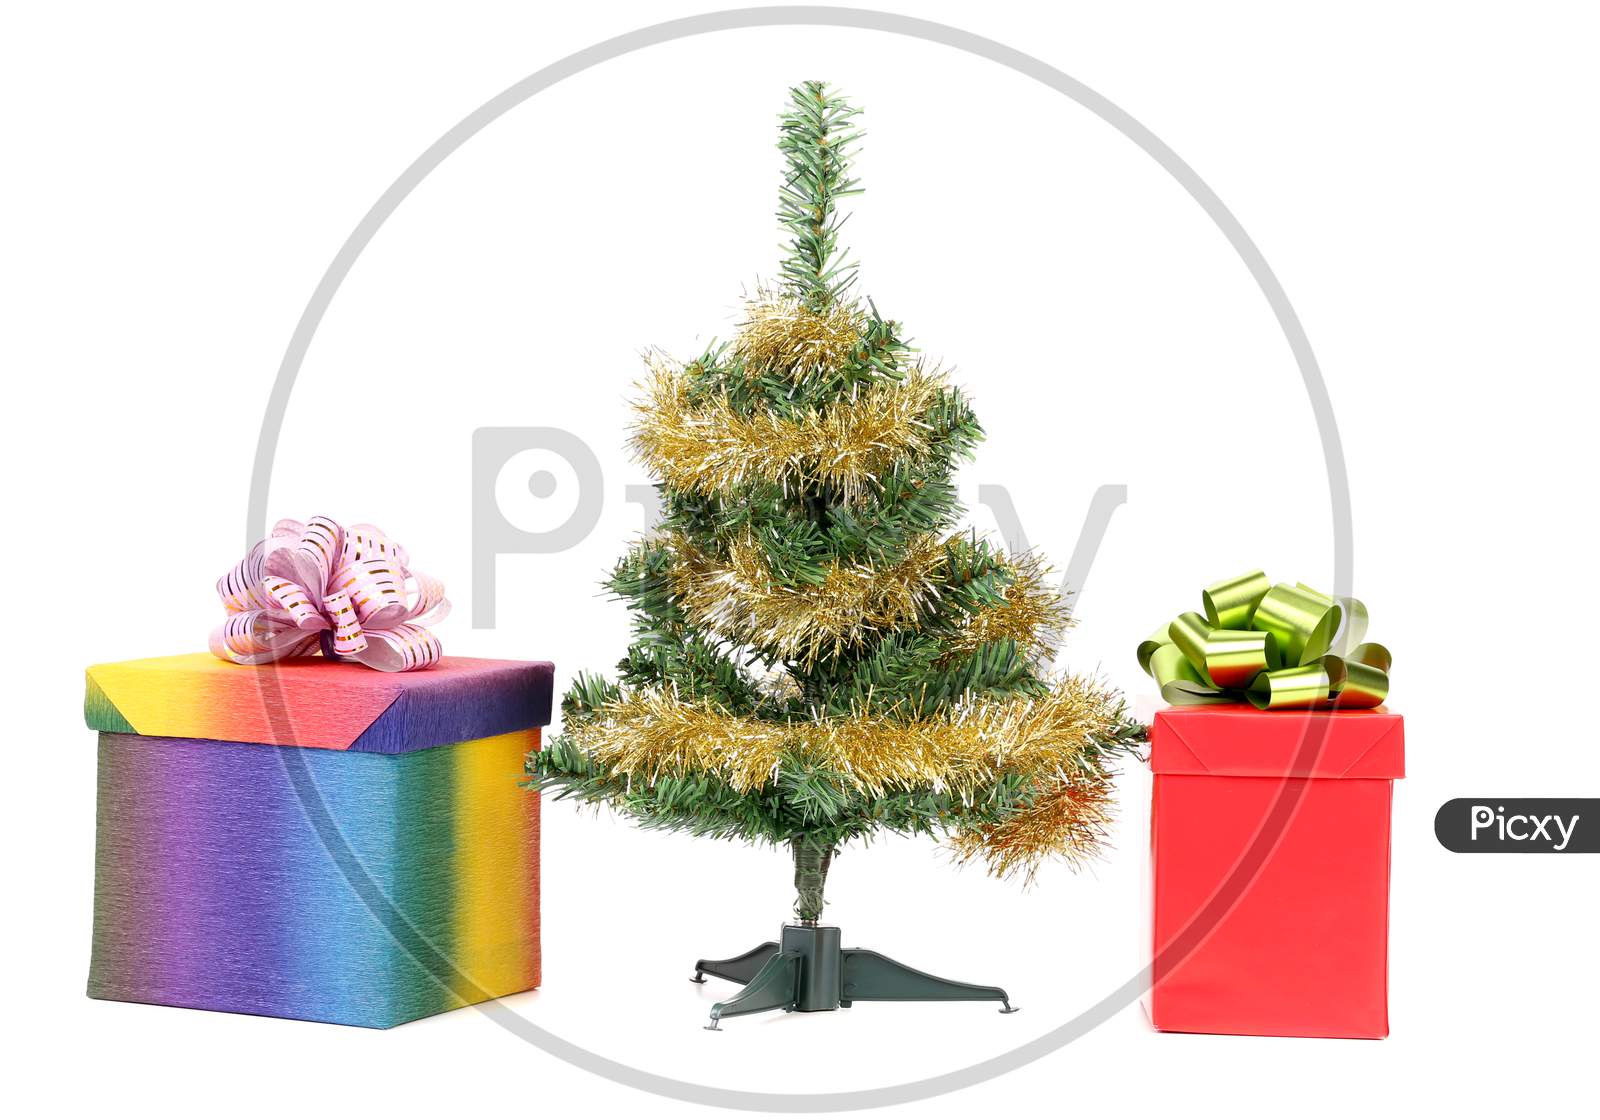 Christmas Tree With Two Gift Boxes. Isolated On A White Background.